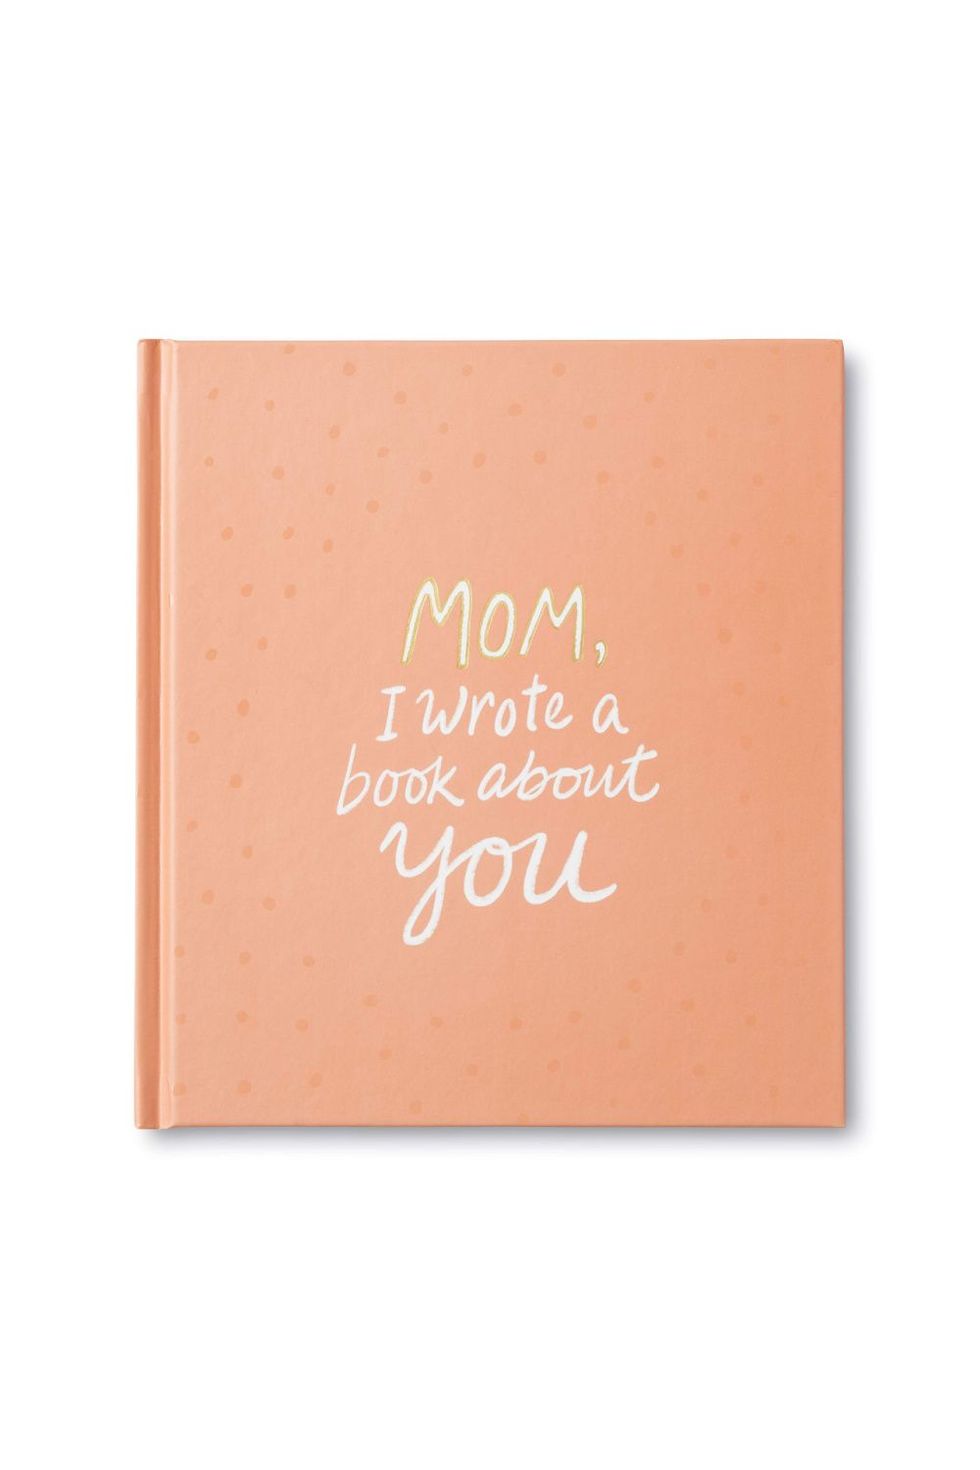 Top 15 Mother's Day Gifts for Mom Who Has Everything that She'll Adore